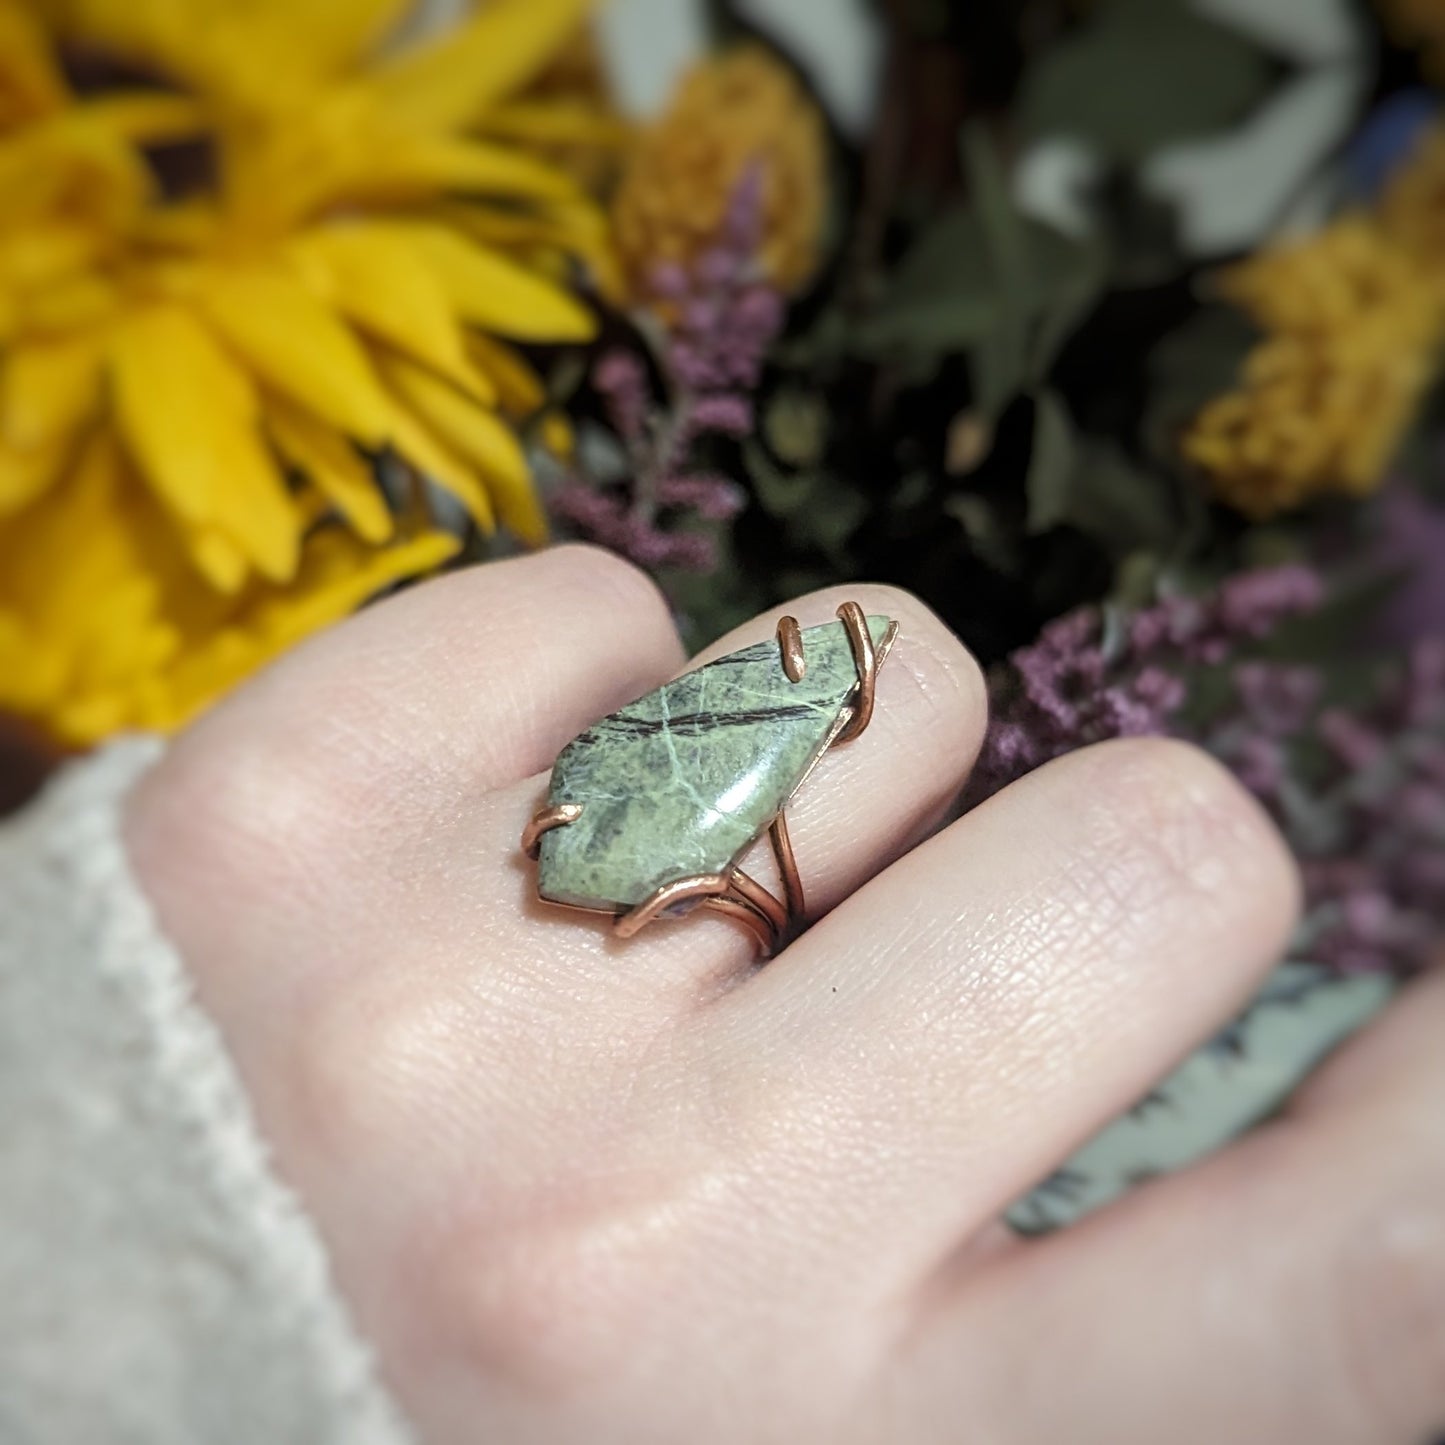 Aras models a copper ring with a skinny kite shaped green Atlantisite stone held on by swirling asymmetrical prongs.